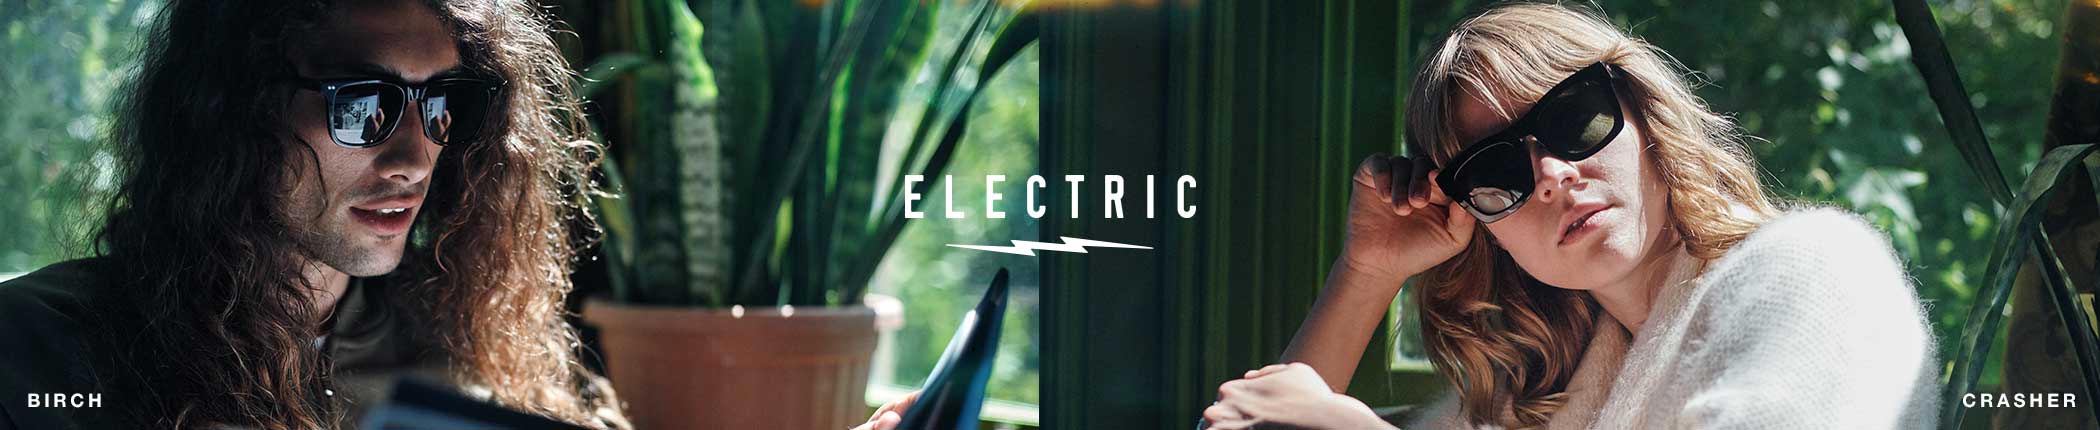 Shop Electric Sunglasses - featuring Electric Birch and Electric Crasher